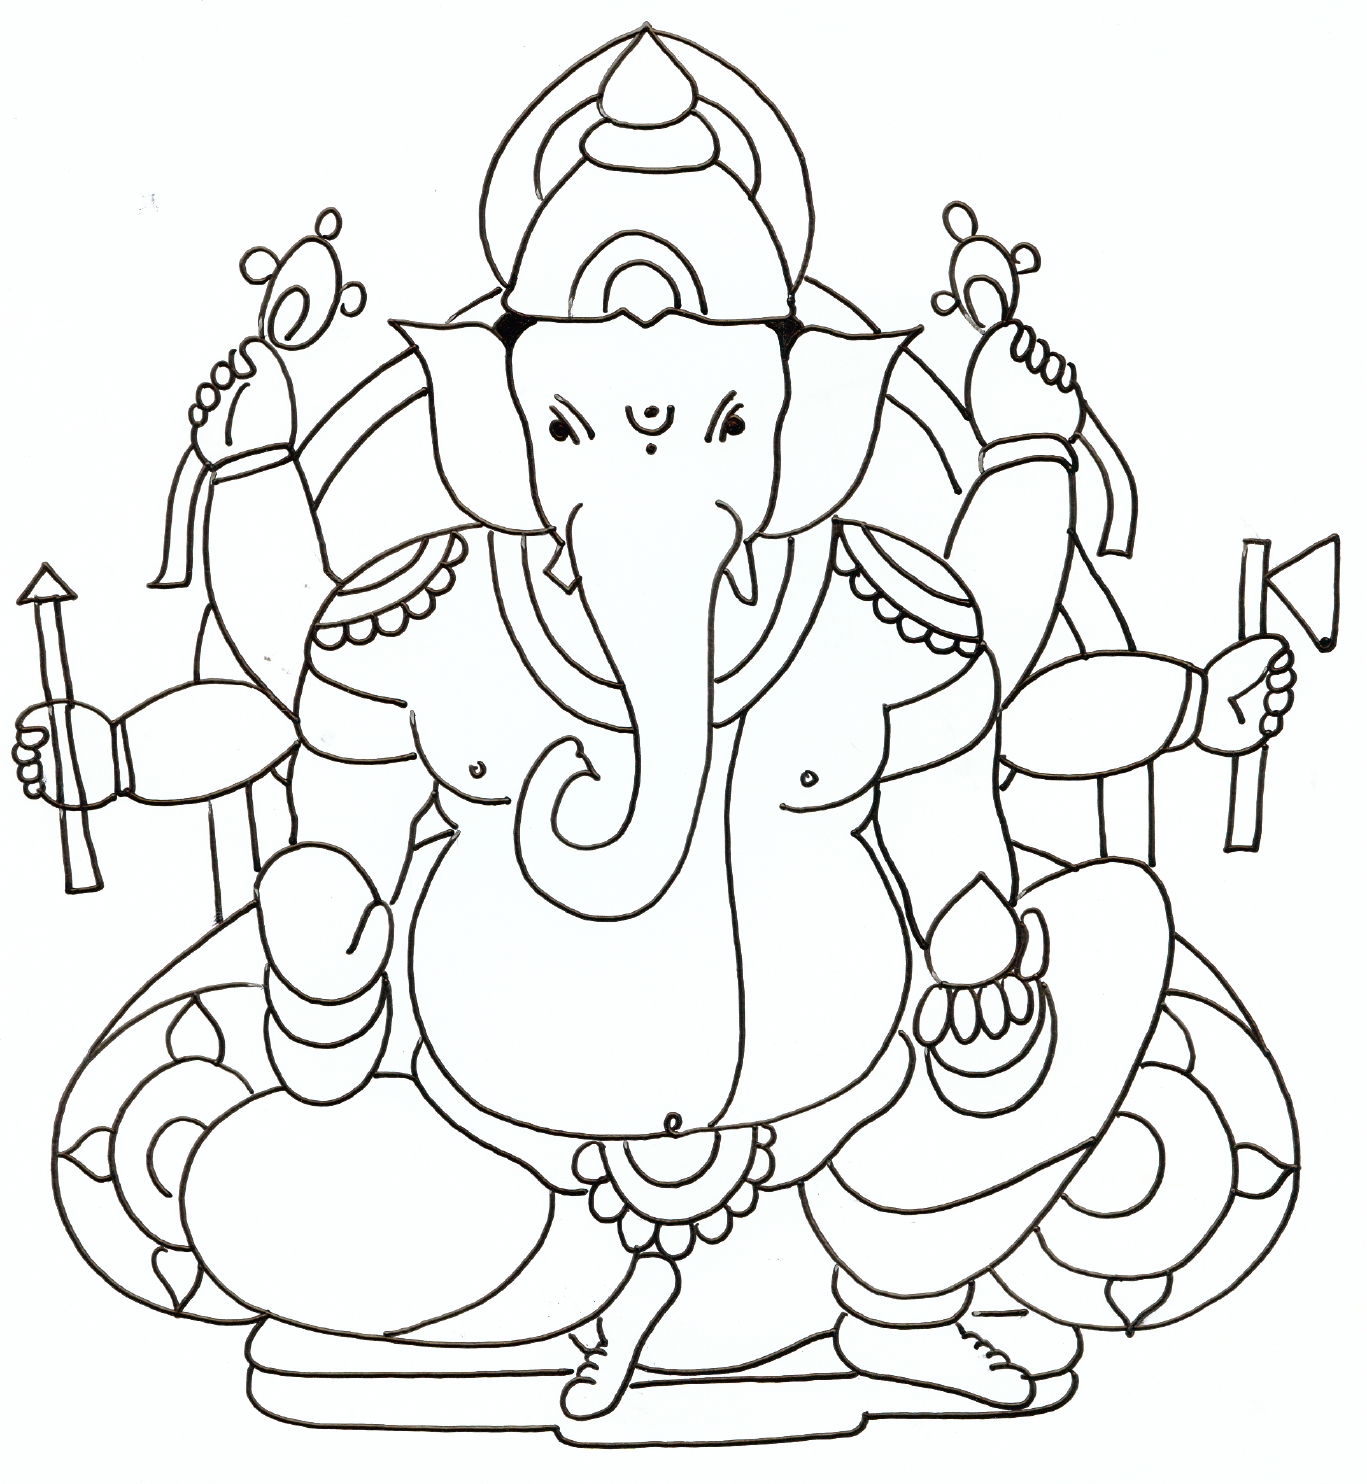 How to Draw Lord Ganesha Drawing Step by Step by mlspcart on DeviantArt